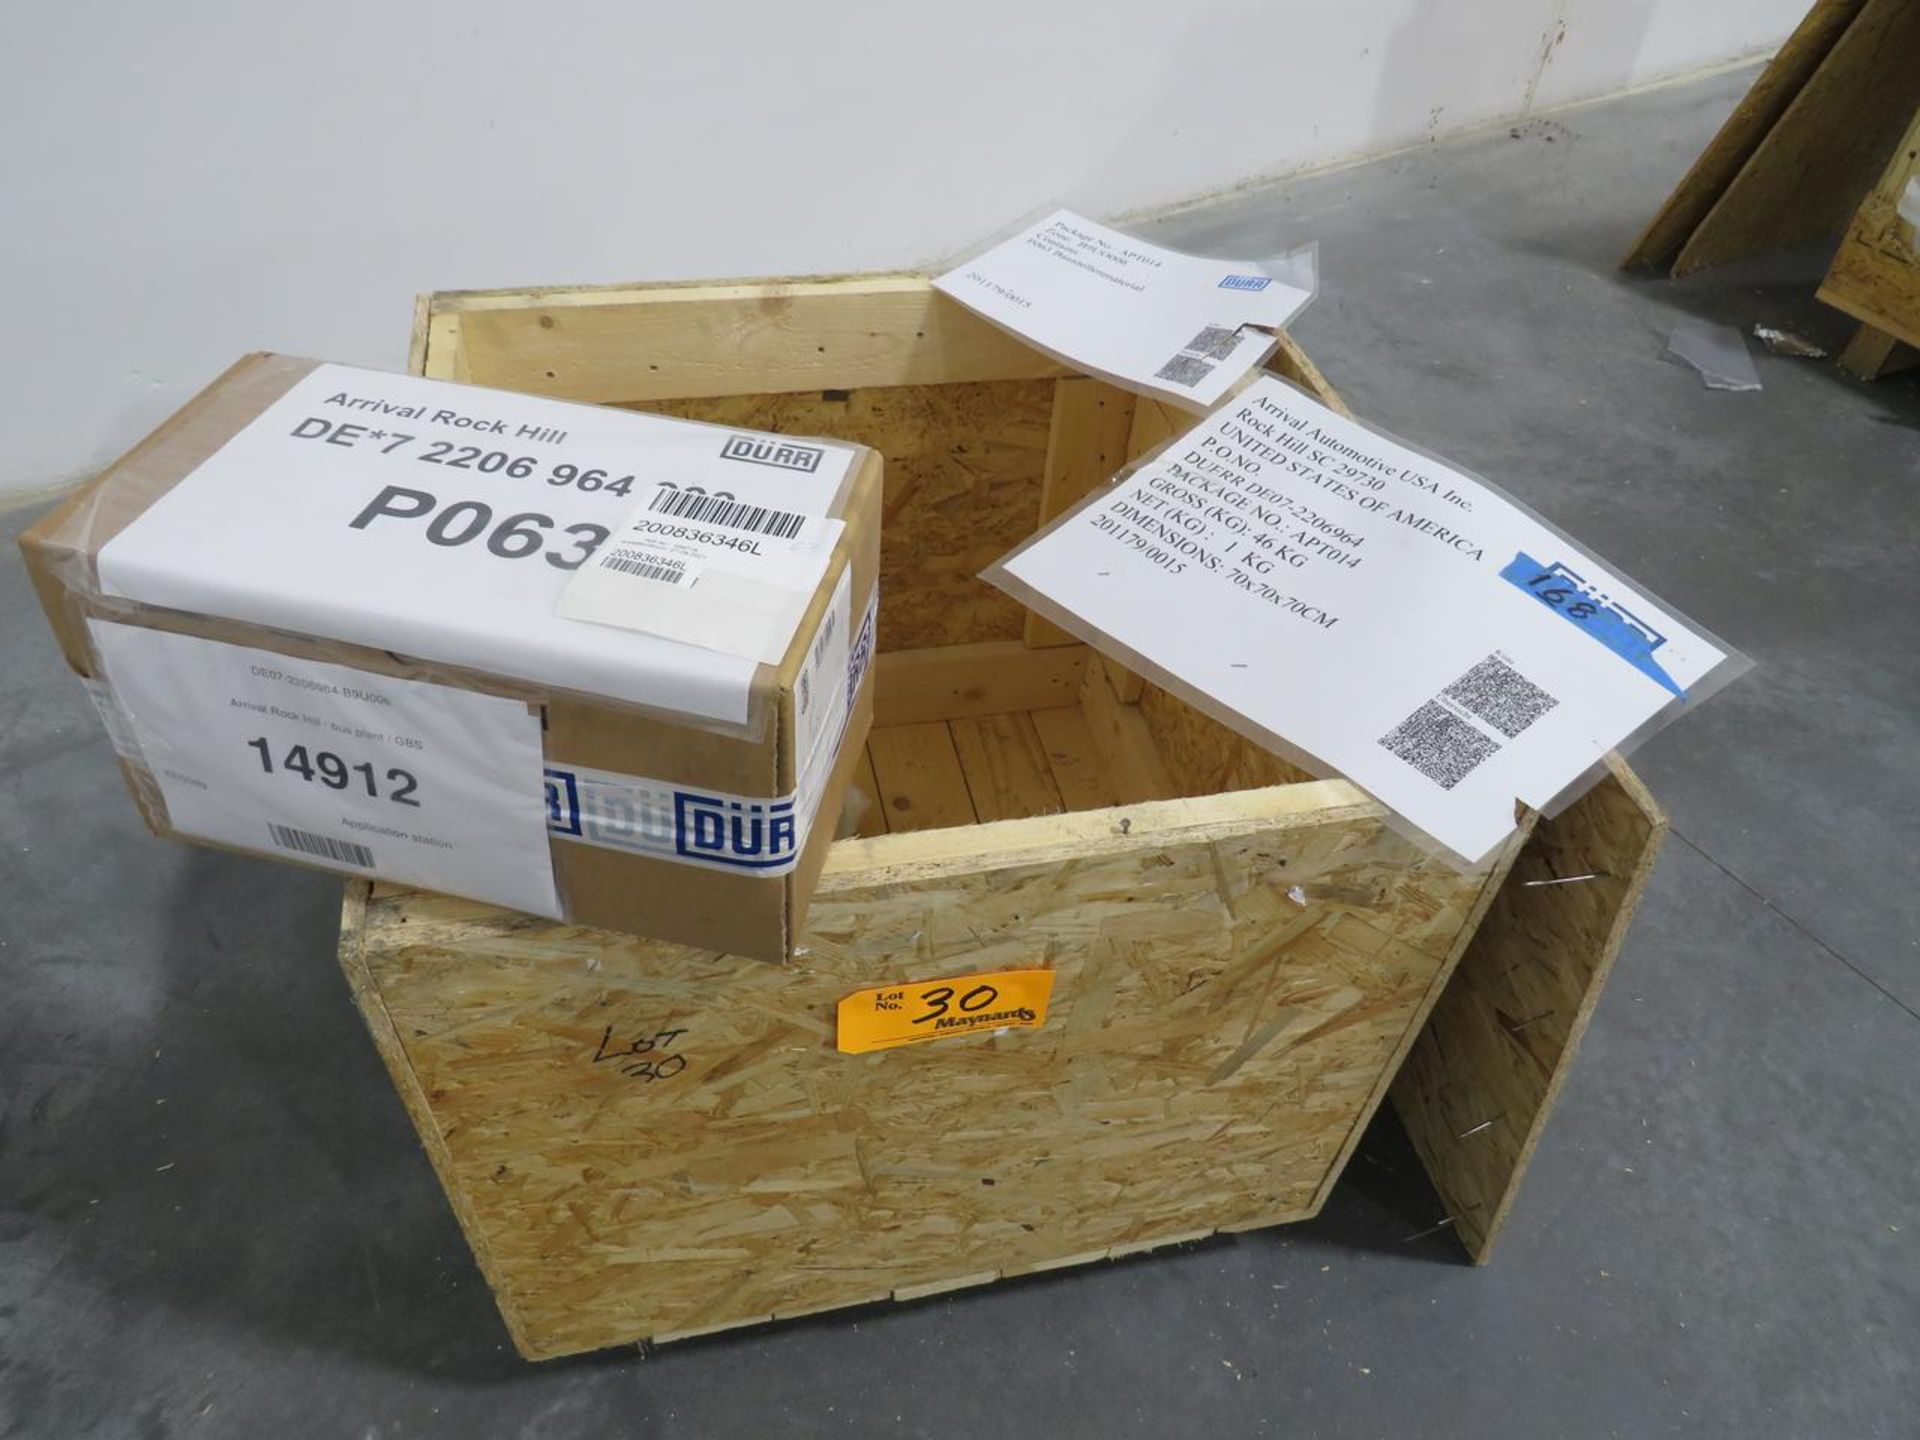 2021 Durr Adhesive Application System 3M-6310 - Image 13 of 14